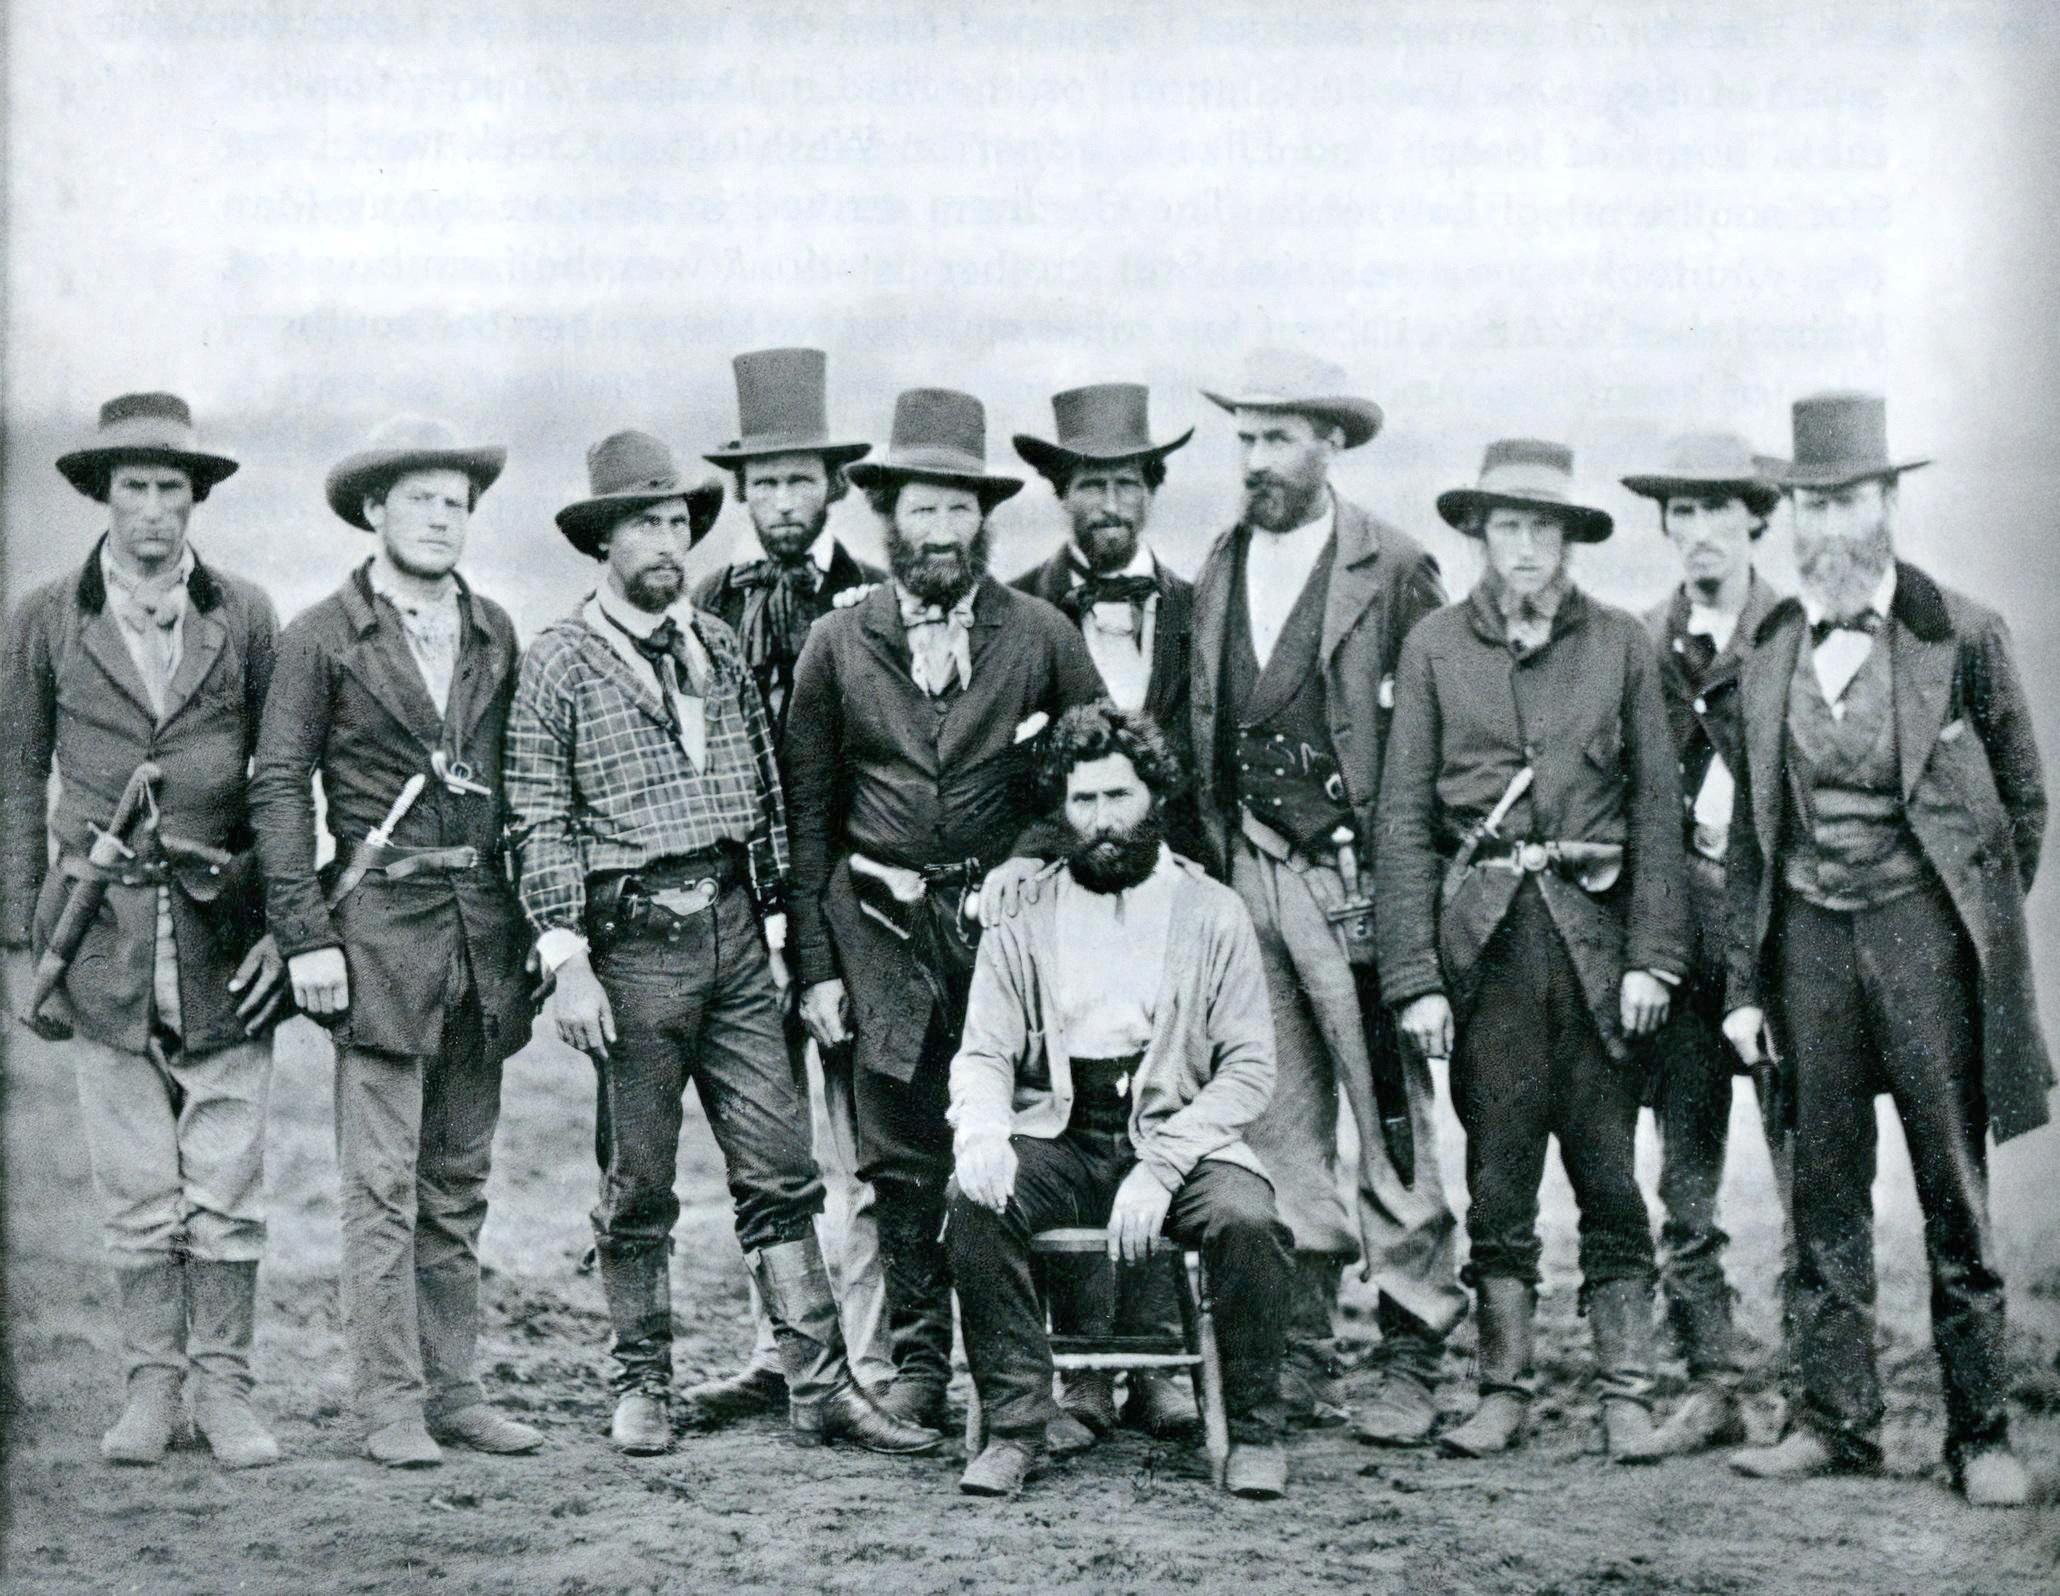 Kansas Territory Free-Staters who freed abolitionist Dr. John Doy from a Missouri jail where he was being held for allegedly abducting slaves, 1859.jpg